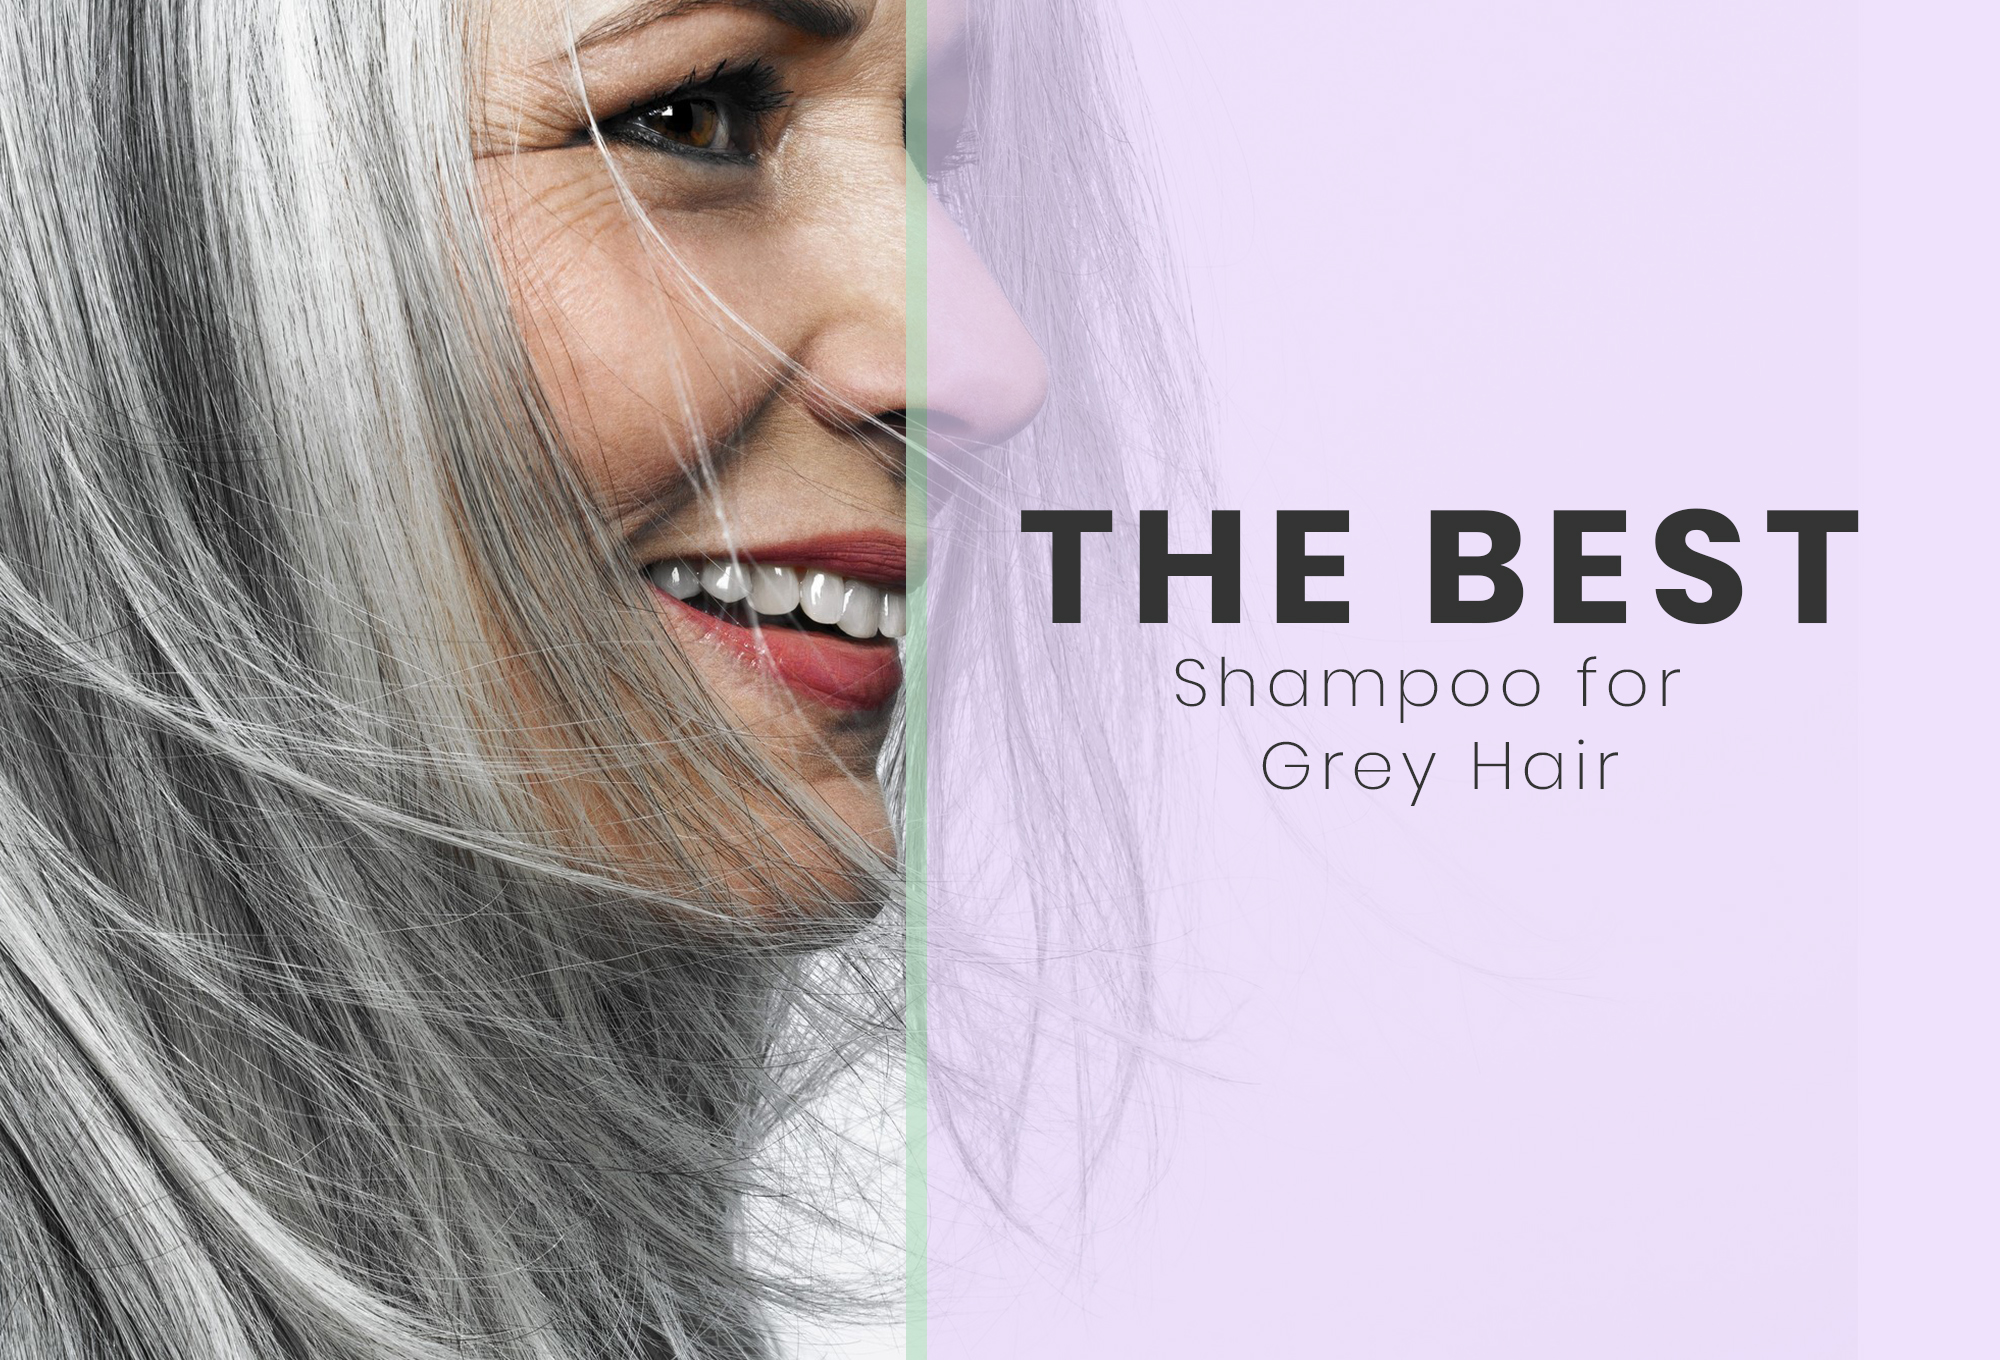 Best Shampoo For Grey Hair February 2020 Reviews Buyers Guide